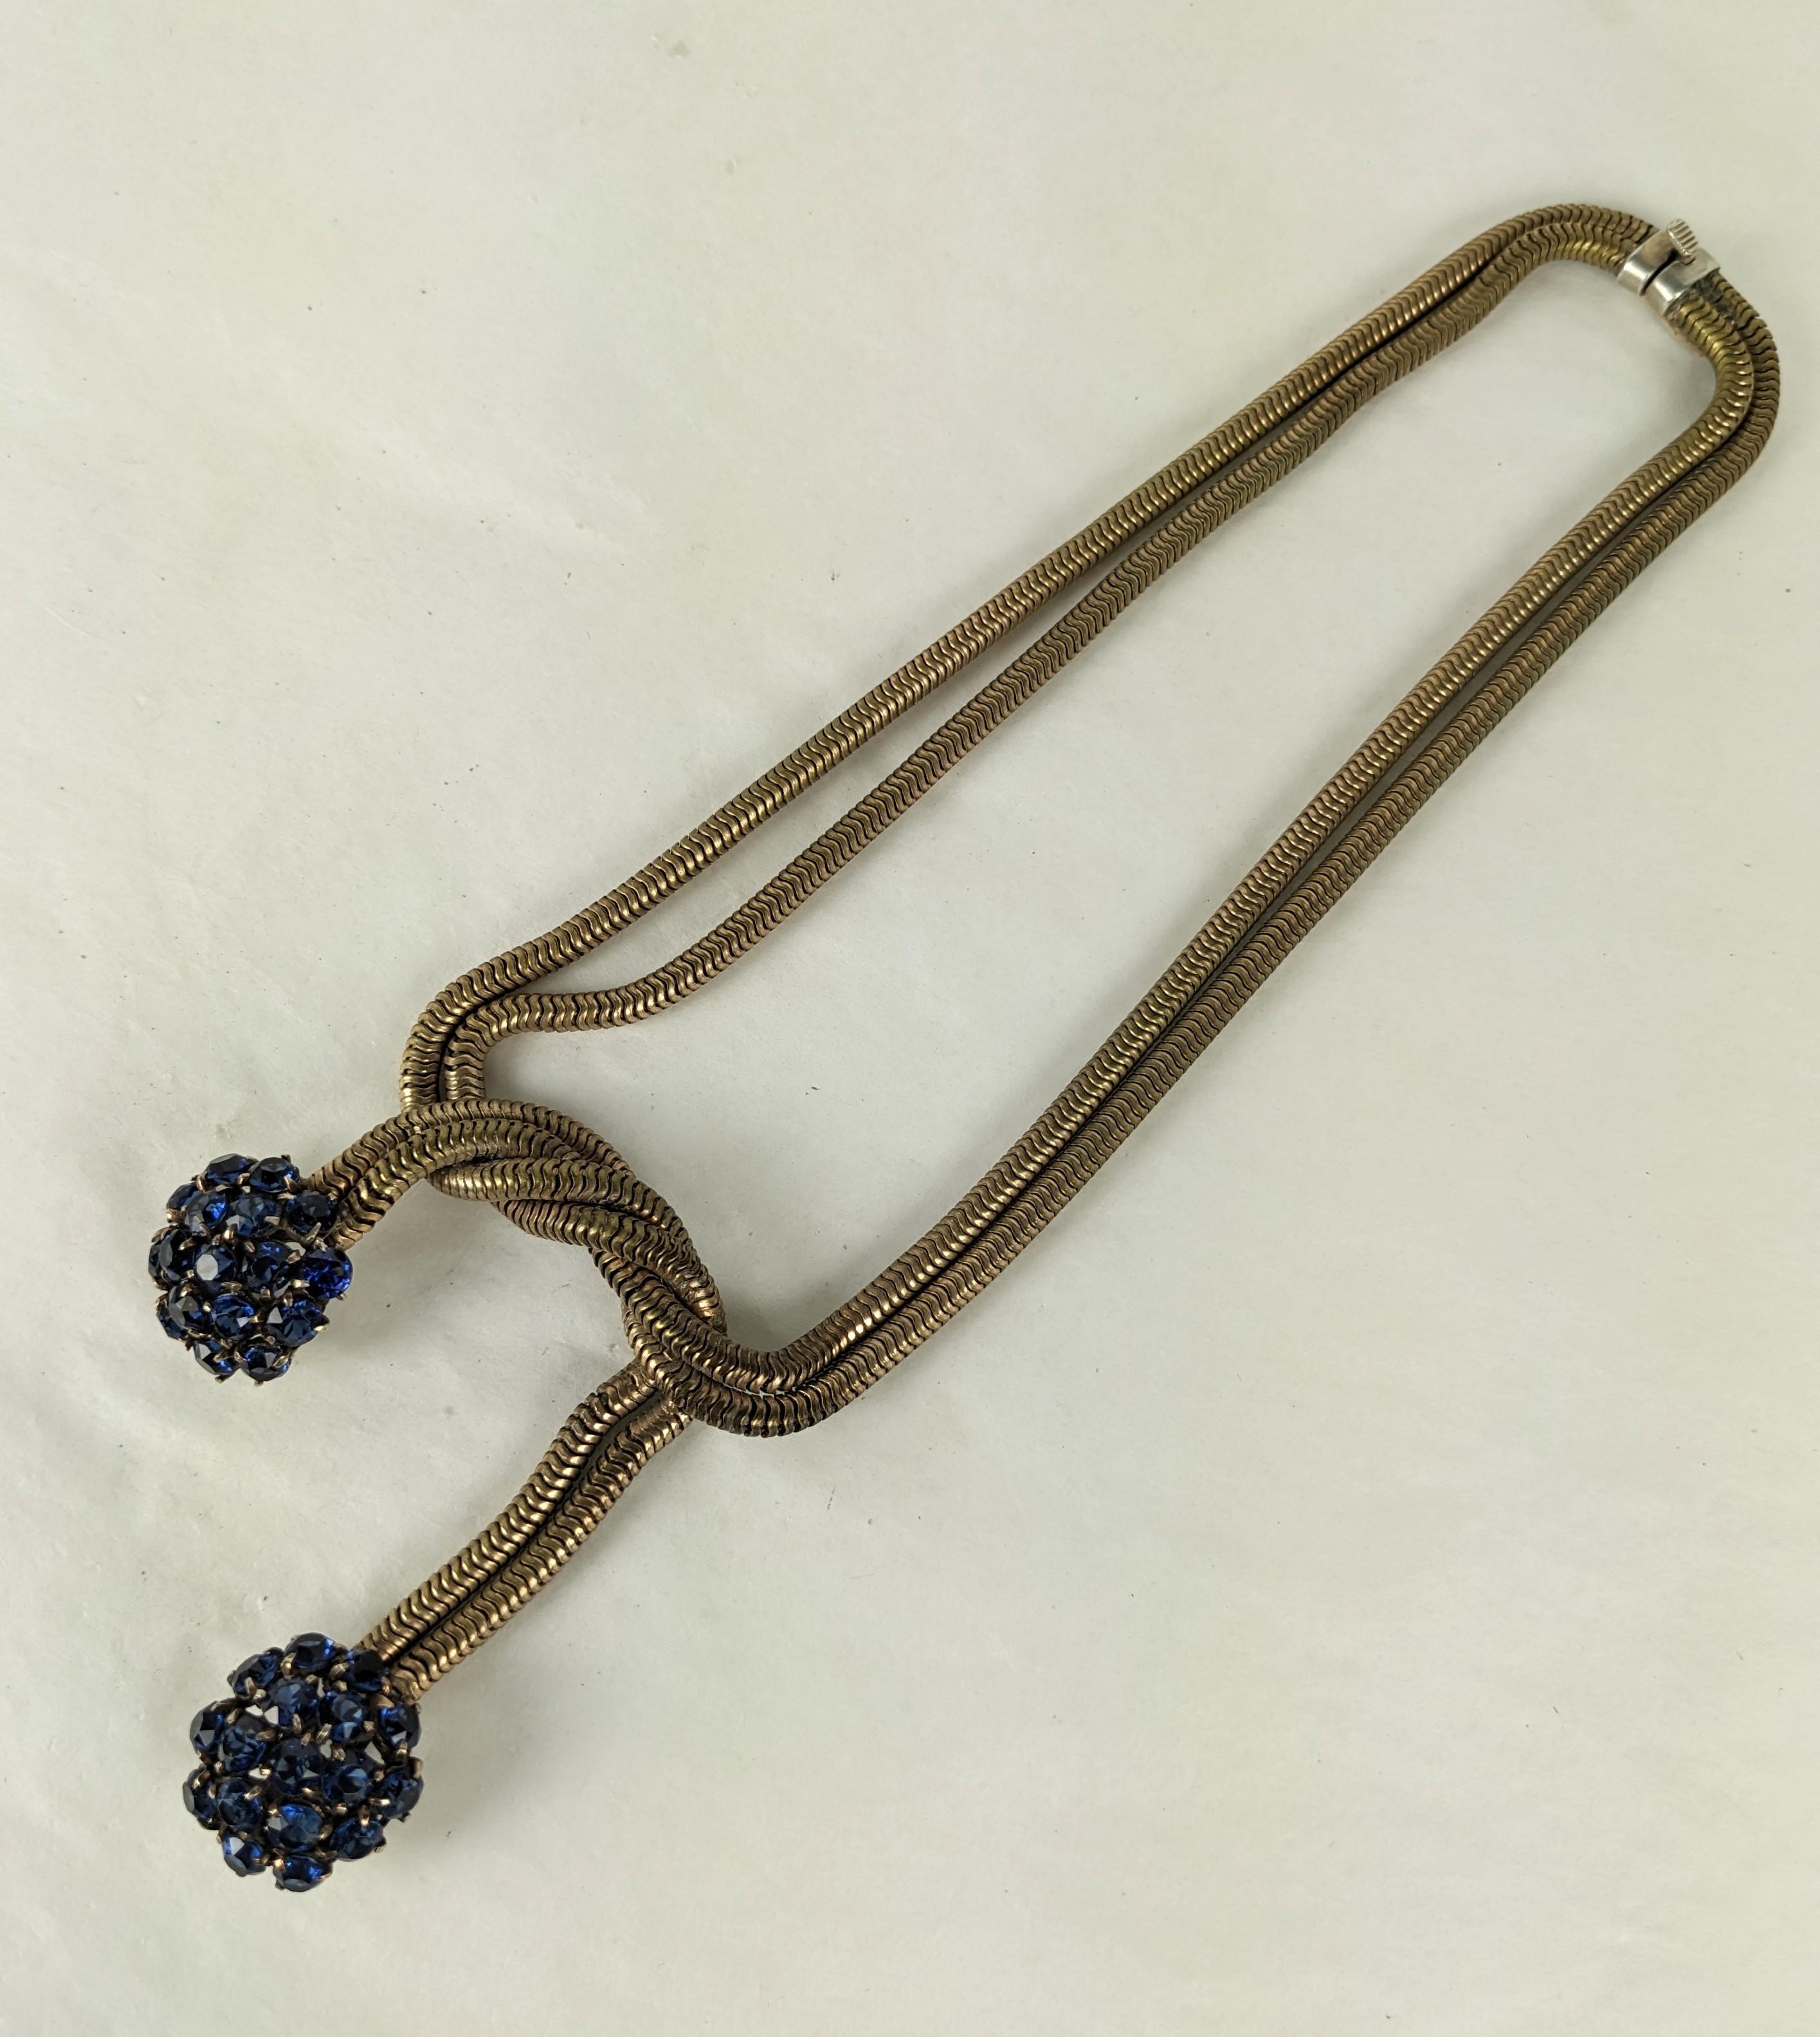 Retro Sapphire French Gaspipe Necklace with pendants of faux sapphire cluster drops. Double brass chaining with knotted design from the 1940's, France. Length 16